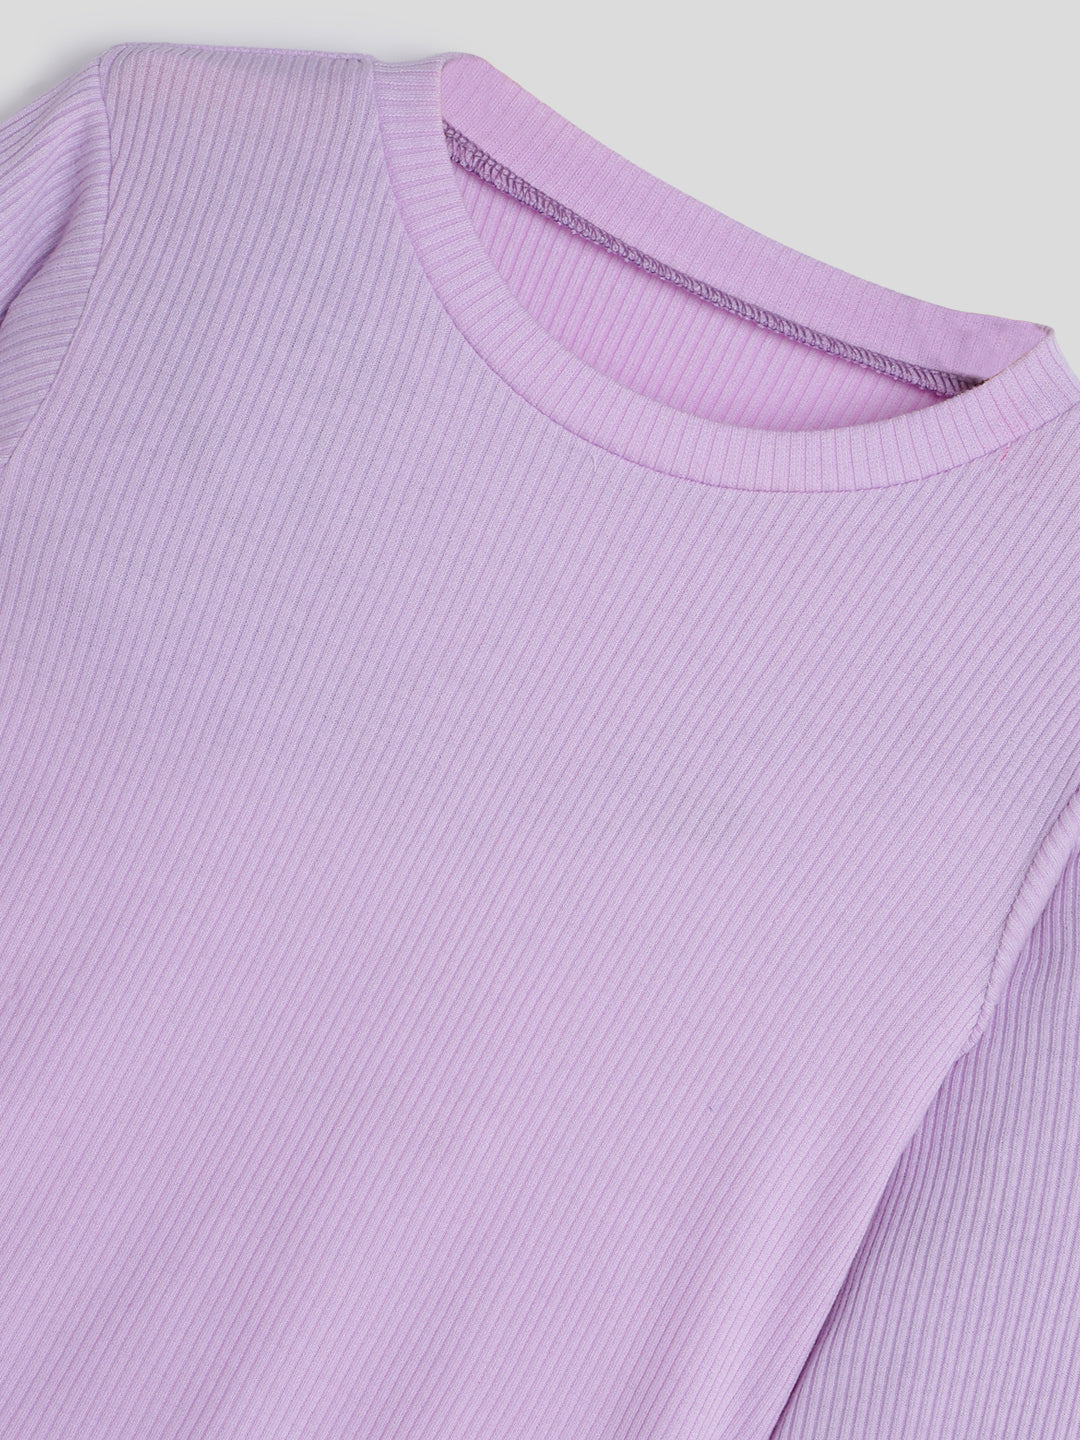 Basic Girls Knitted Tee- Lilac Somersault